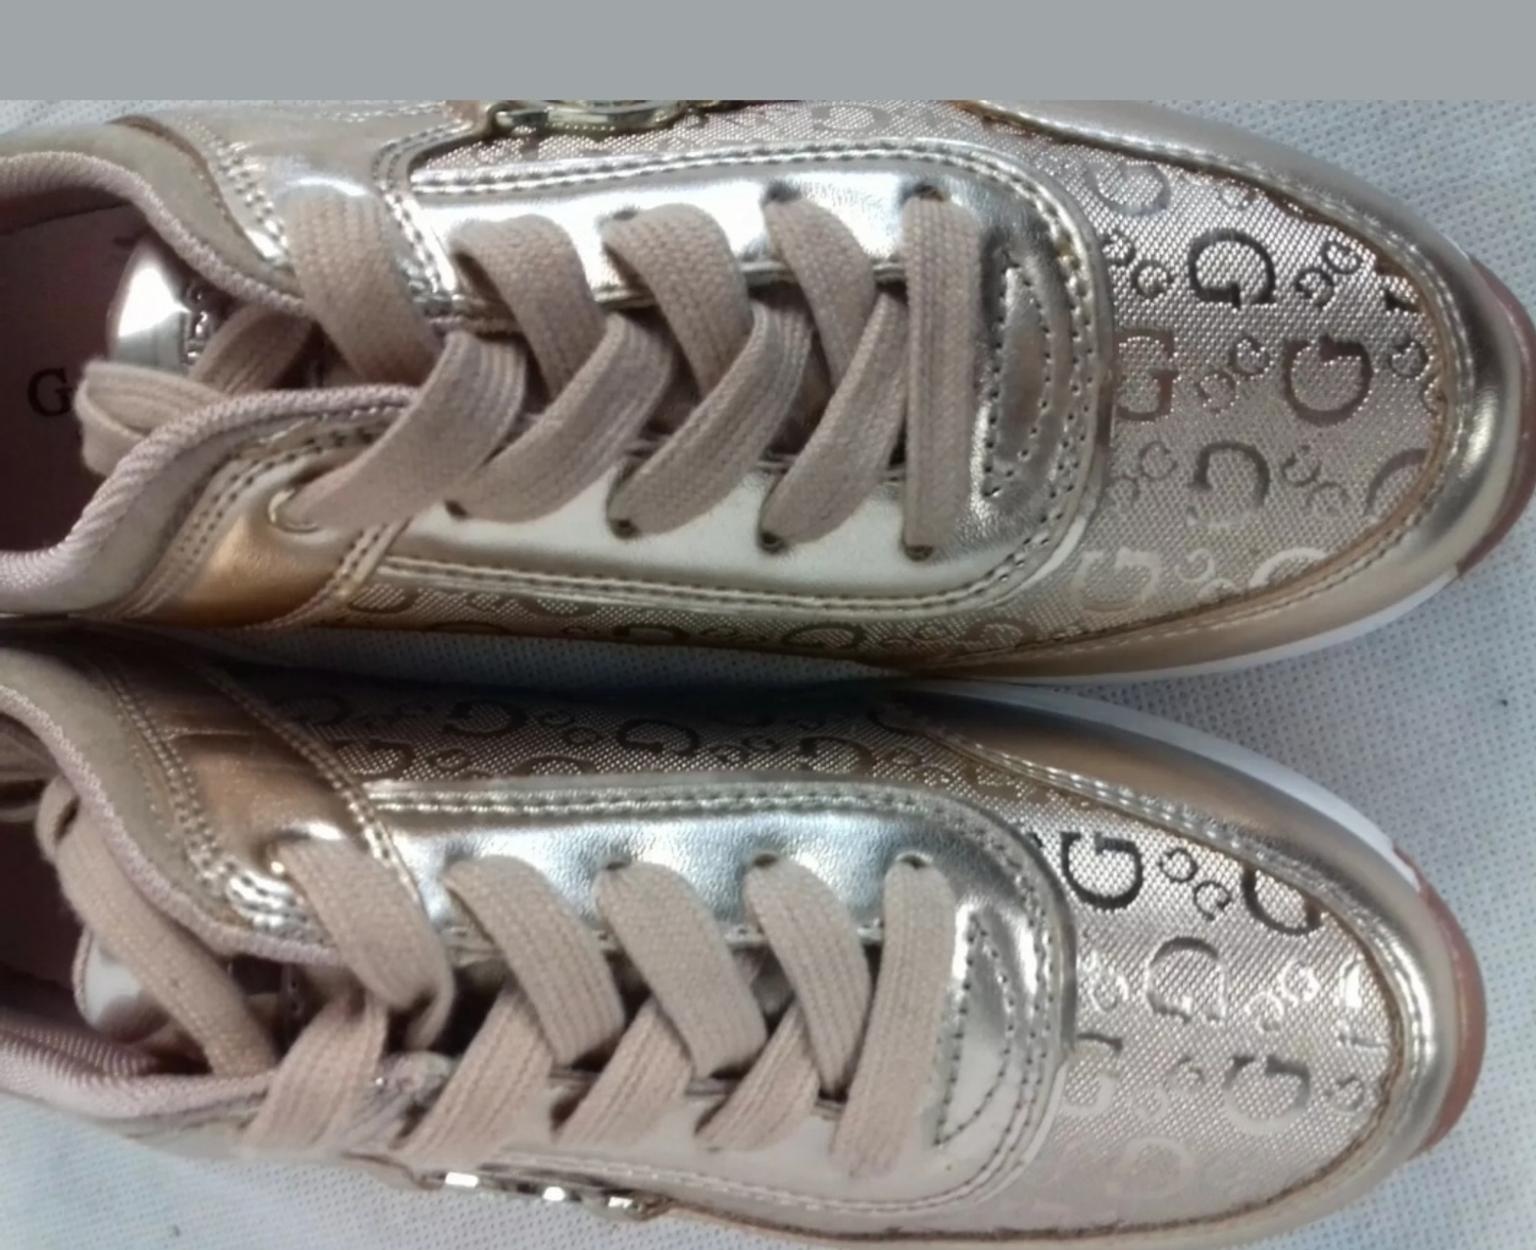 gold guess trainers